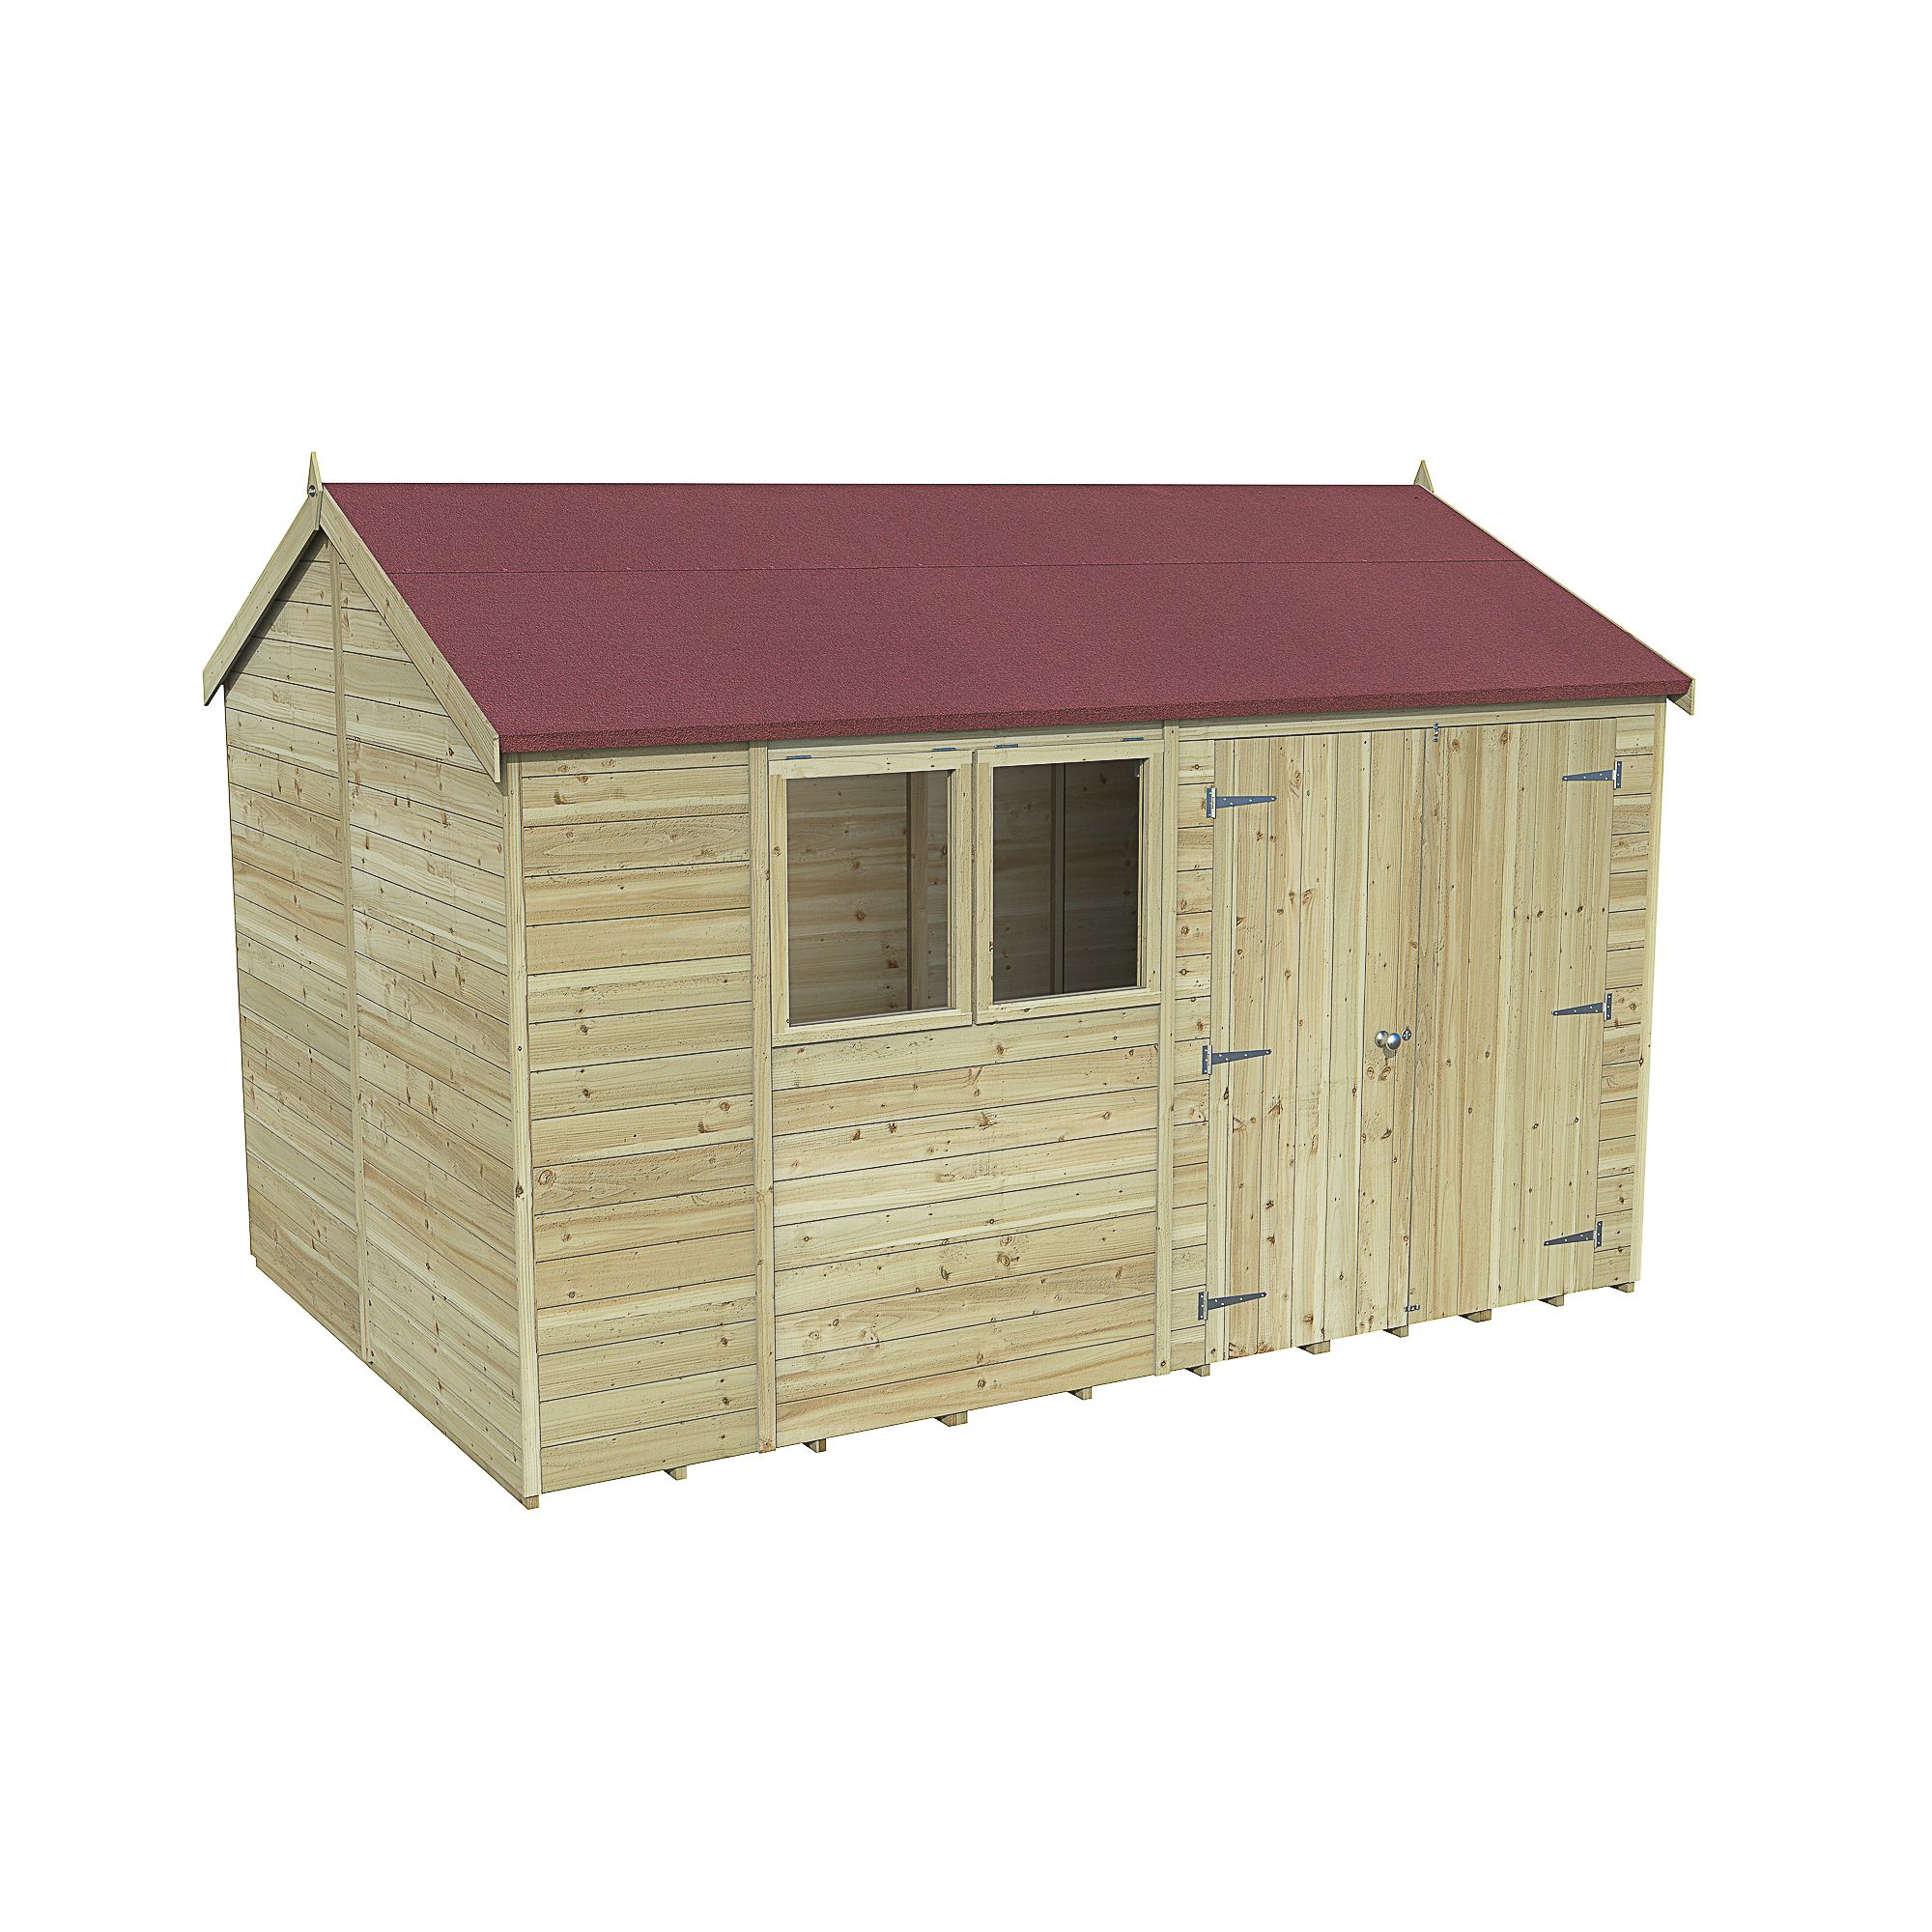 Forest Garden Timberdale 12x8 ft Reverse apex Wooden 2 door Shed with floor